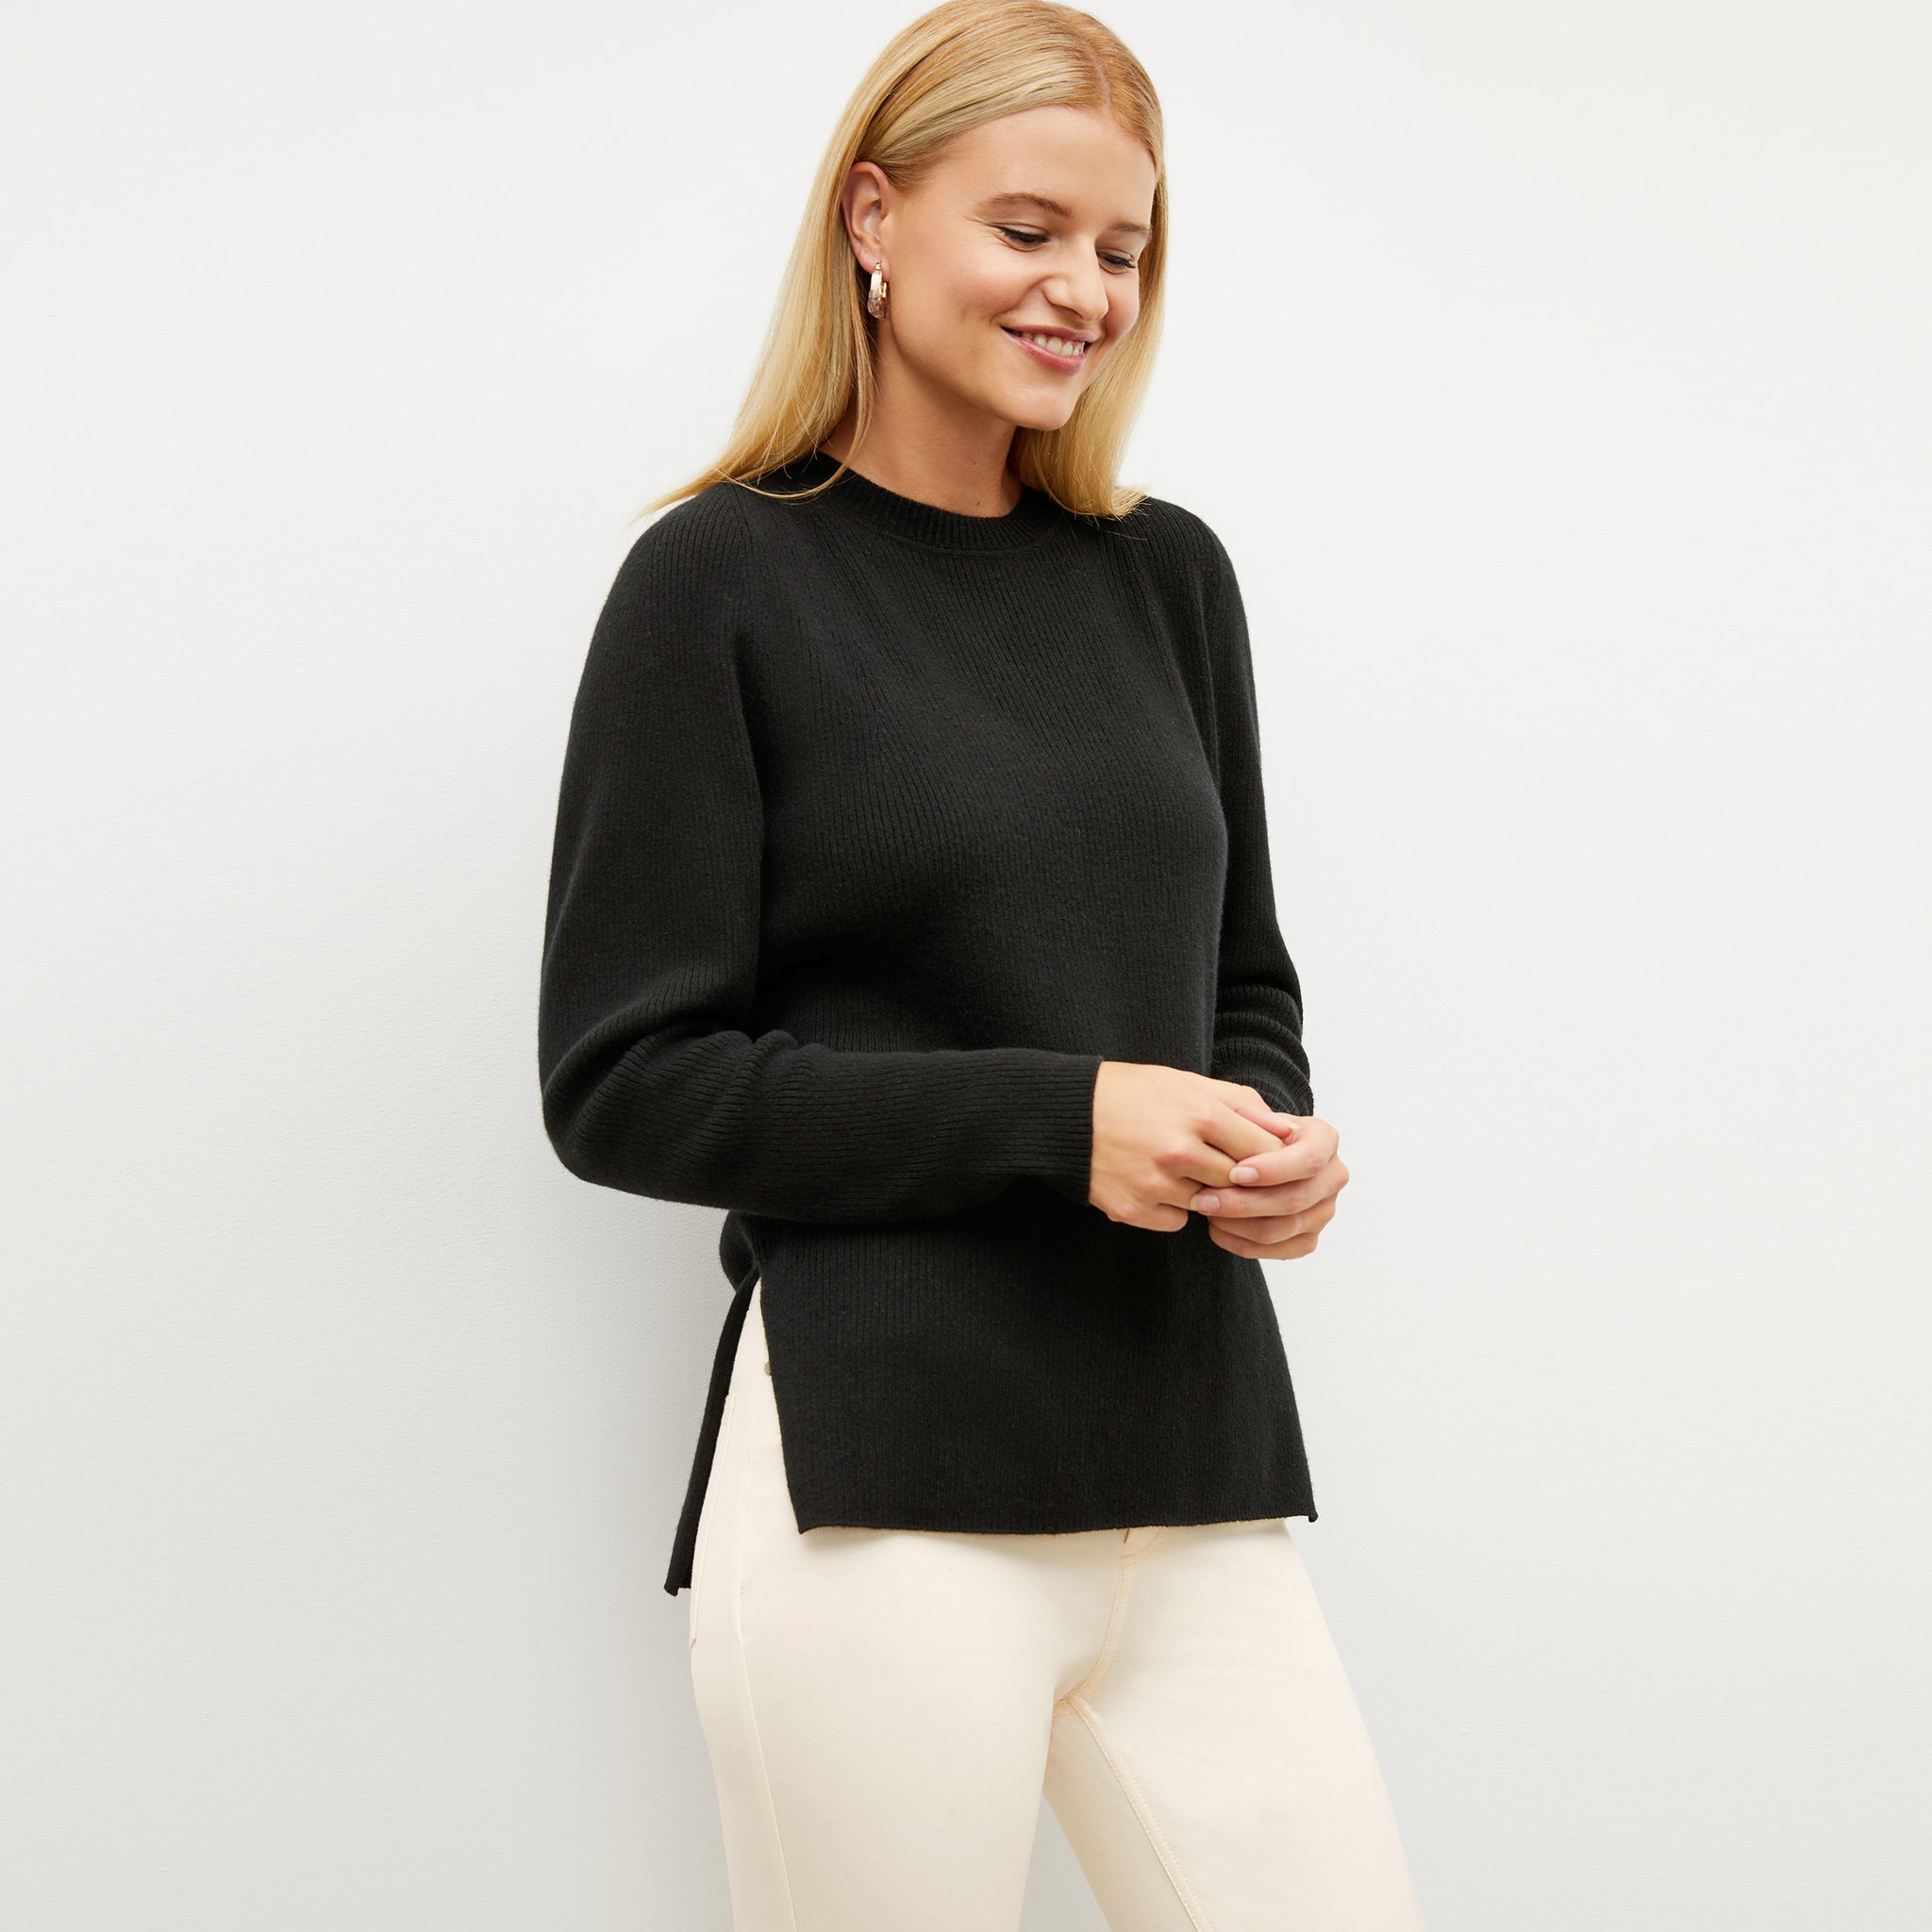 Front image of a woman wearing the ollie sweater in black